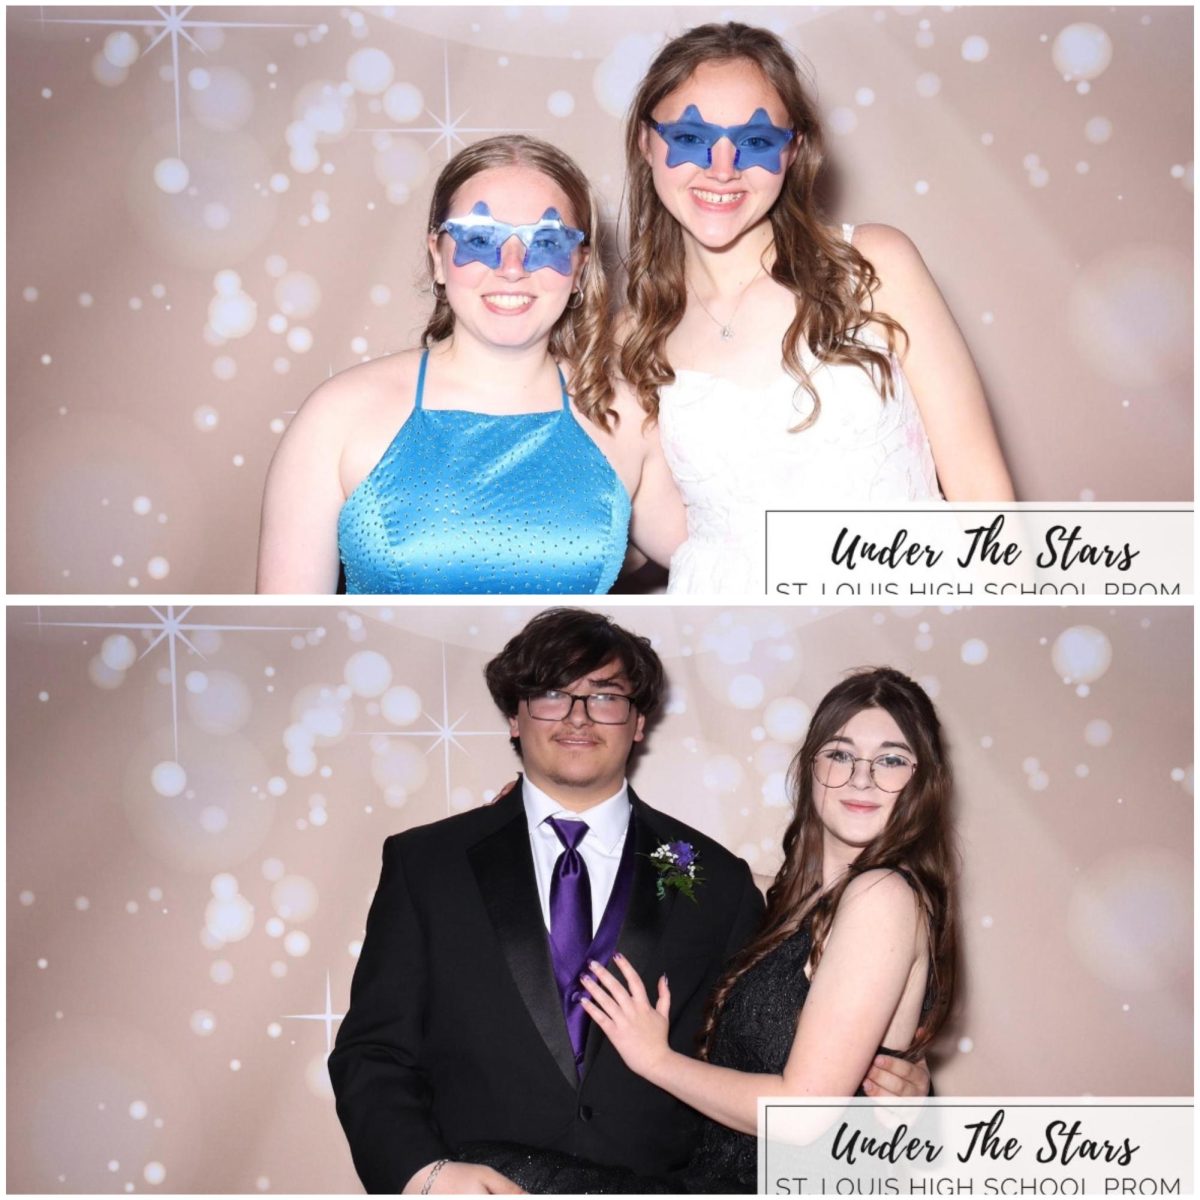 The+prom+photobooth+was+a+success+for+both+friends+and+couples+alike%21